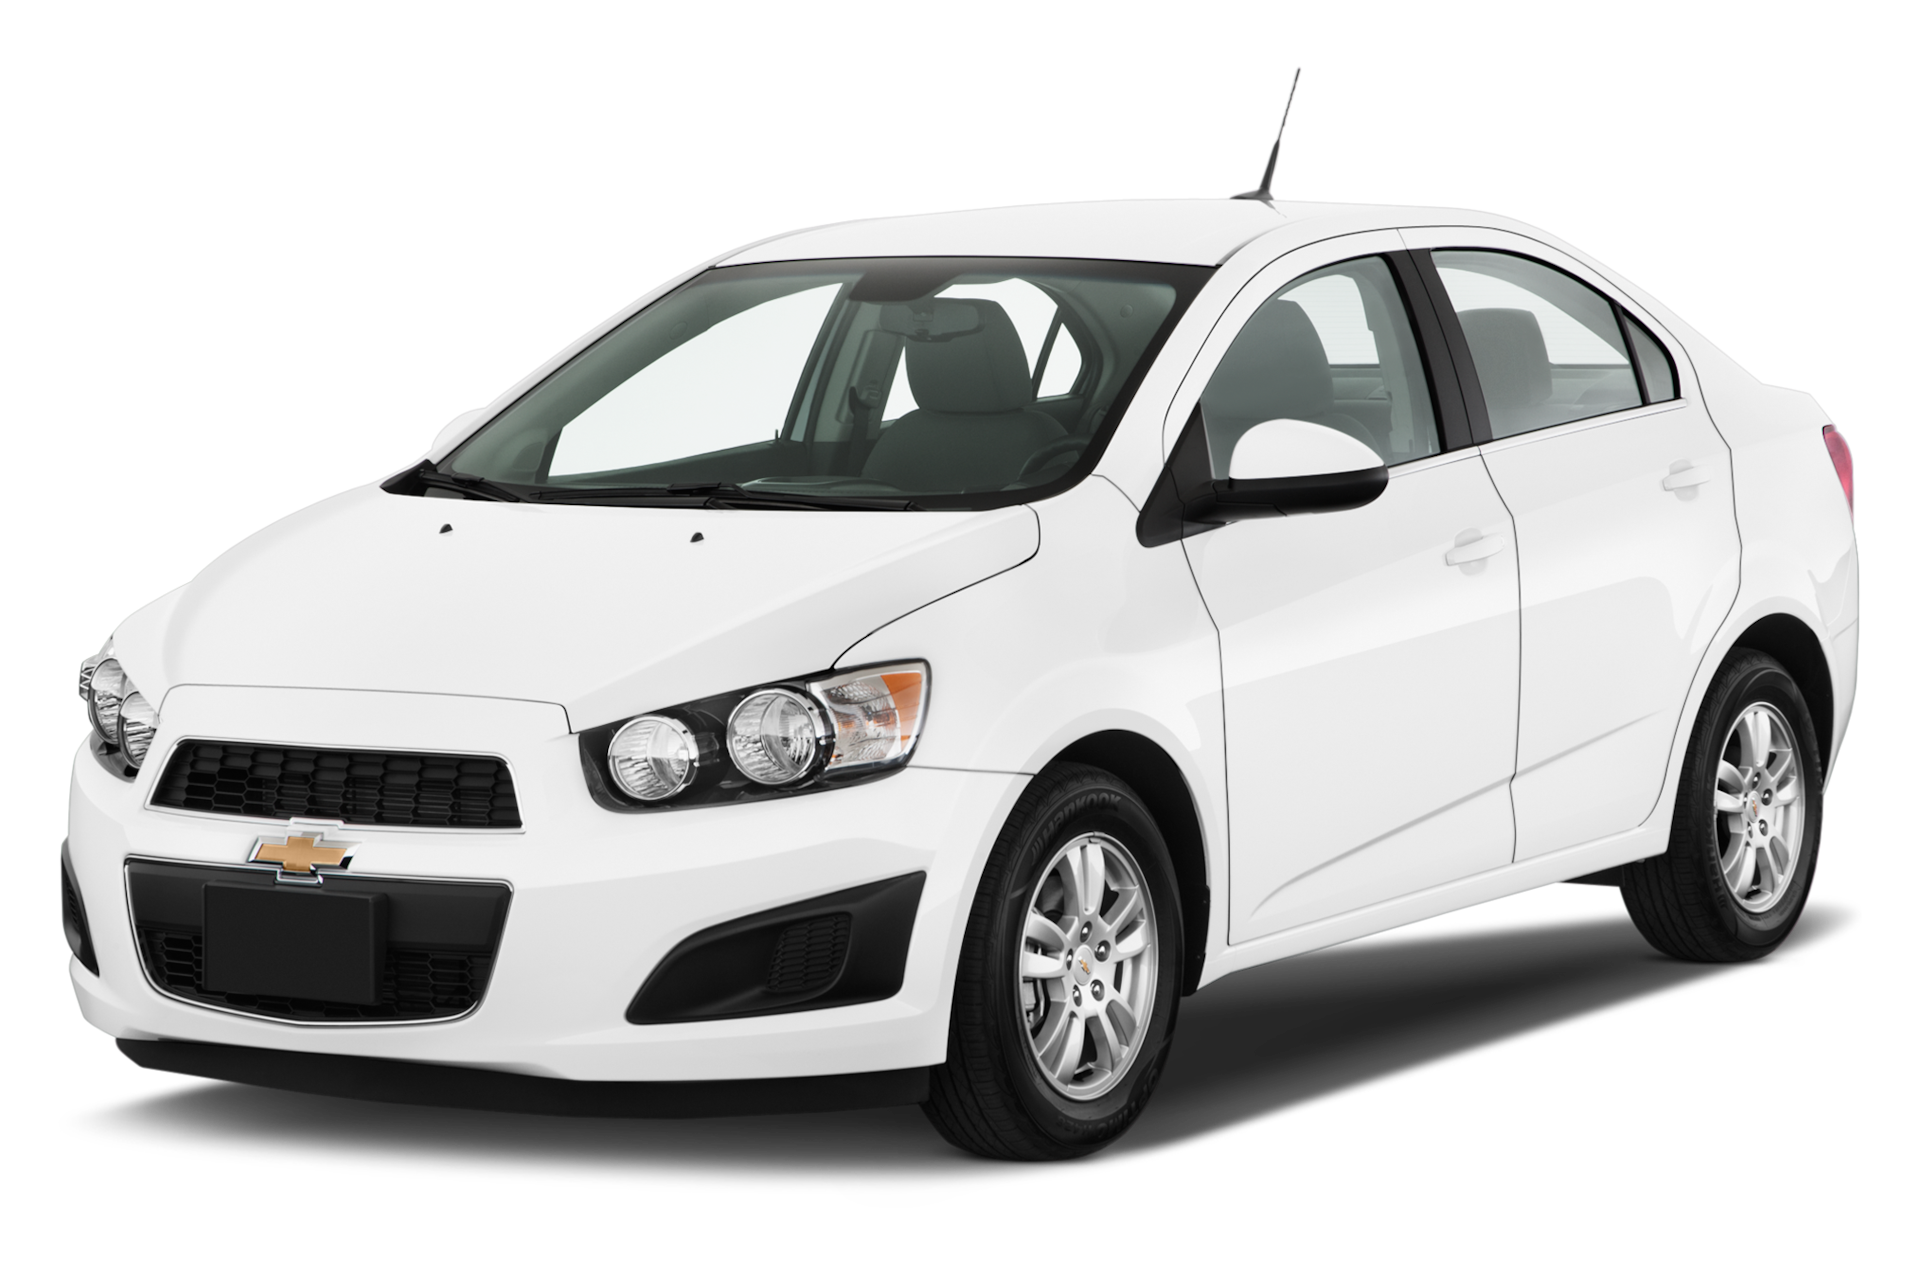 2014 Chevrolet Sonic Prices, Reviews, and Photos - MotorTrend